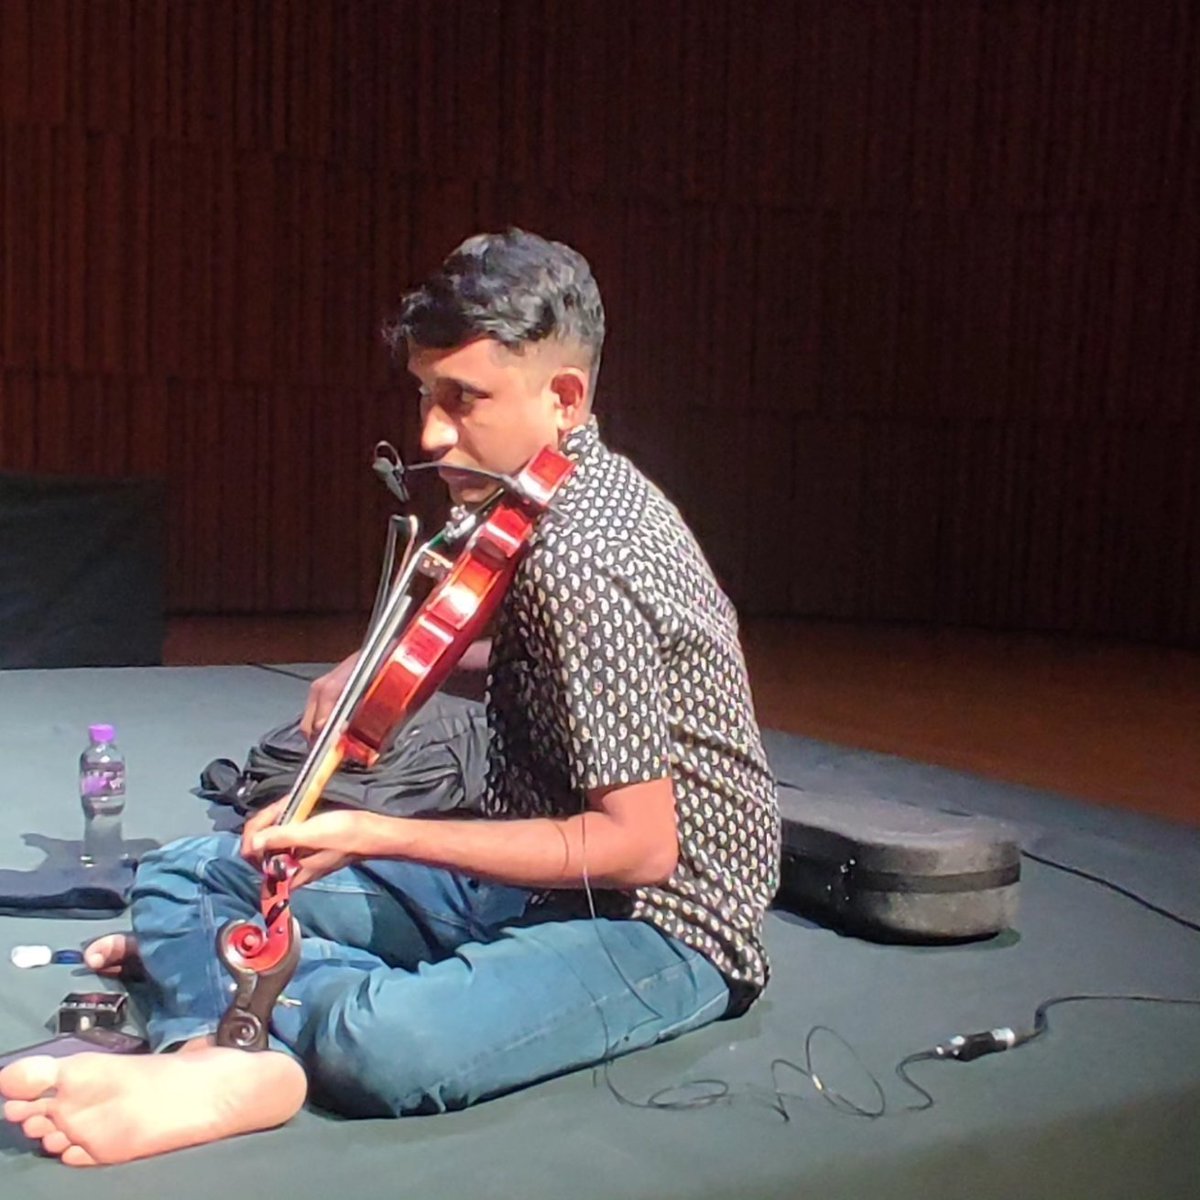 Sound check moments as we look forward to ascending the stage in a few minutes for HKUST Cosmopolis Festival at Hongkong! With Vittal Rangan Mridangam Sai Giridhar S Krishna.